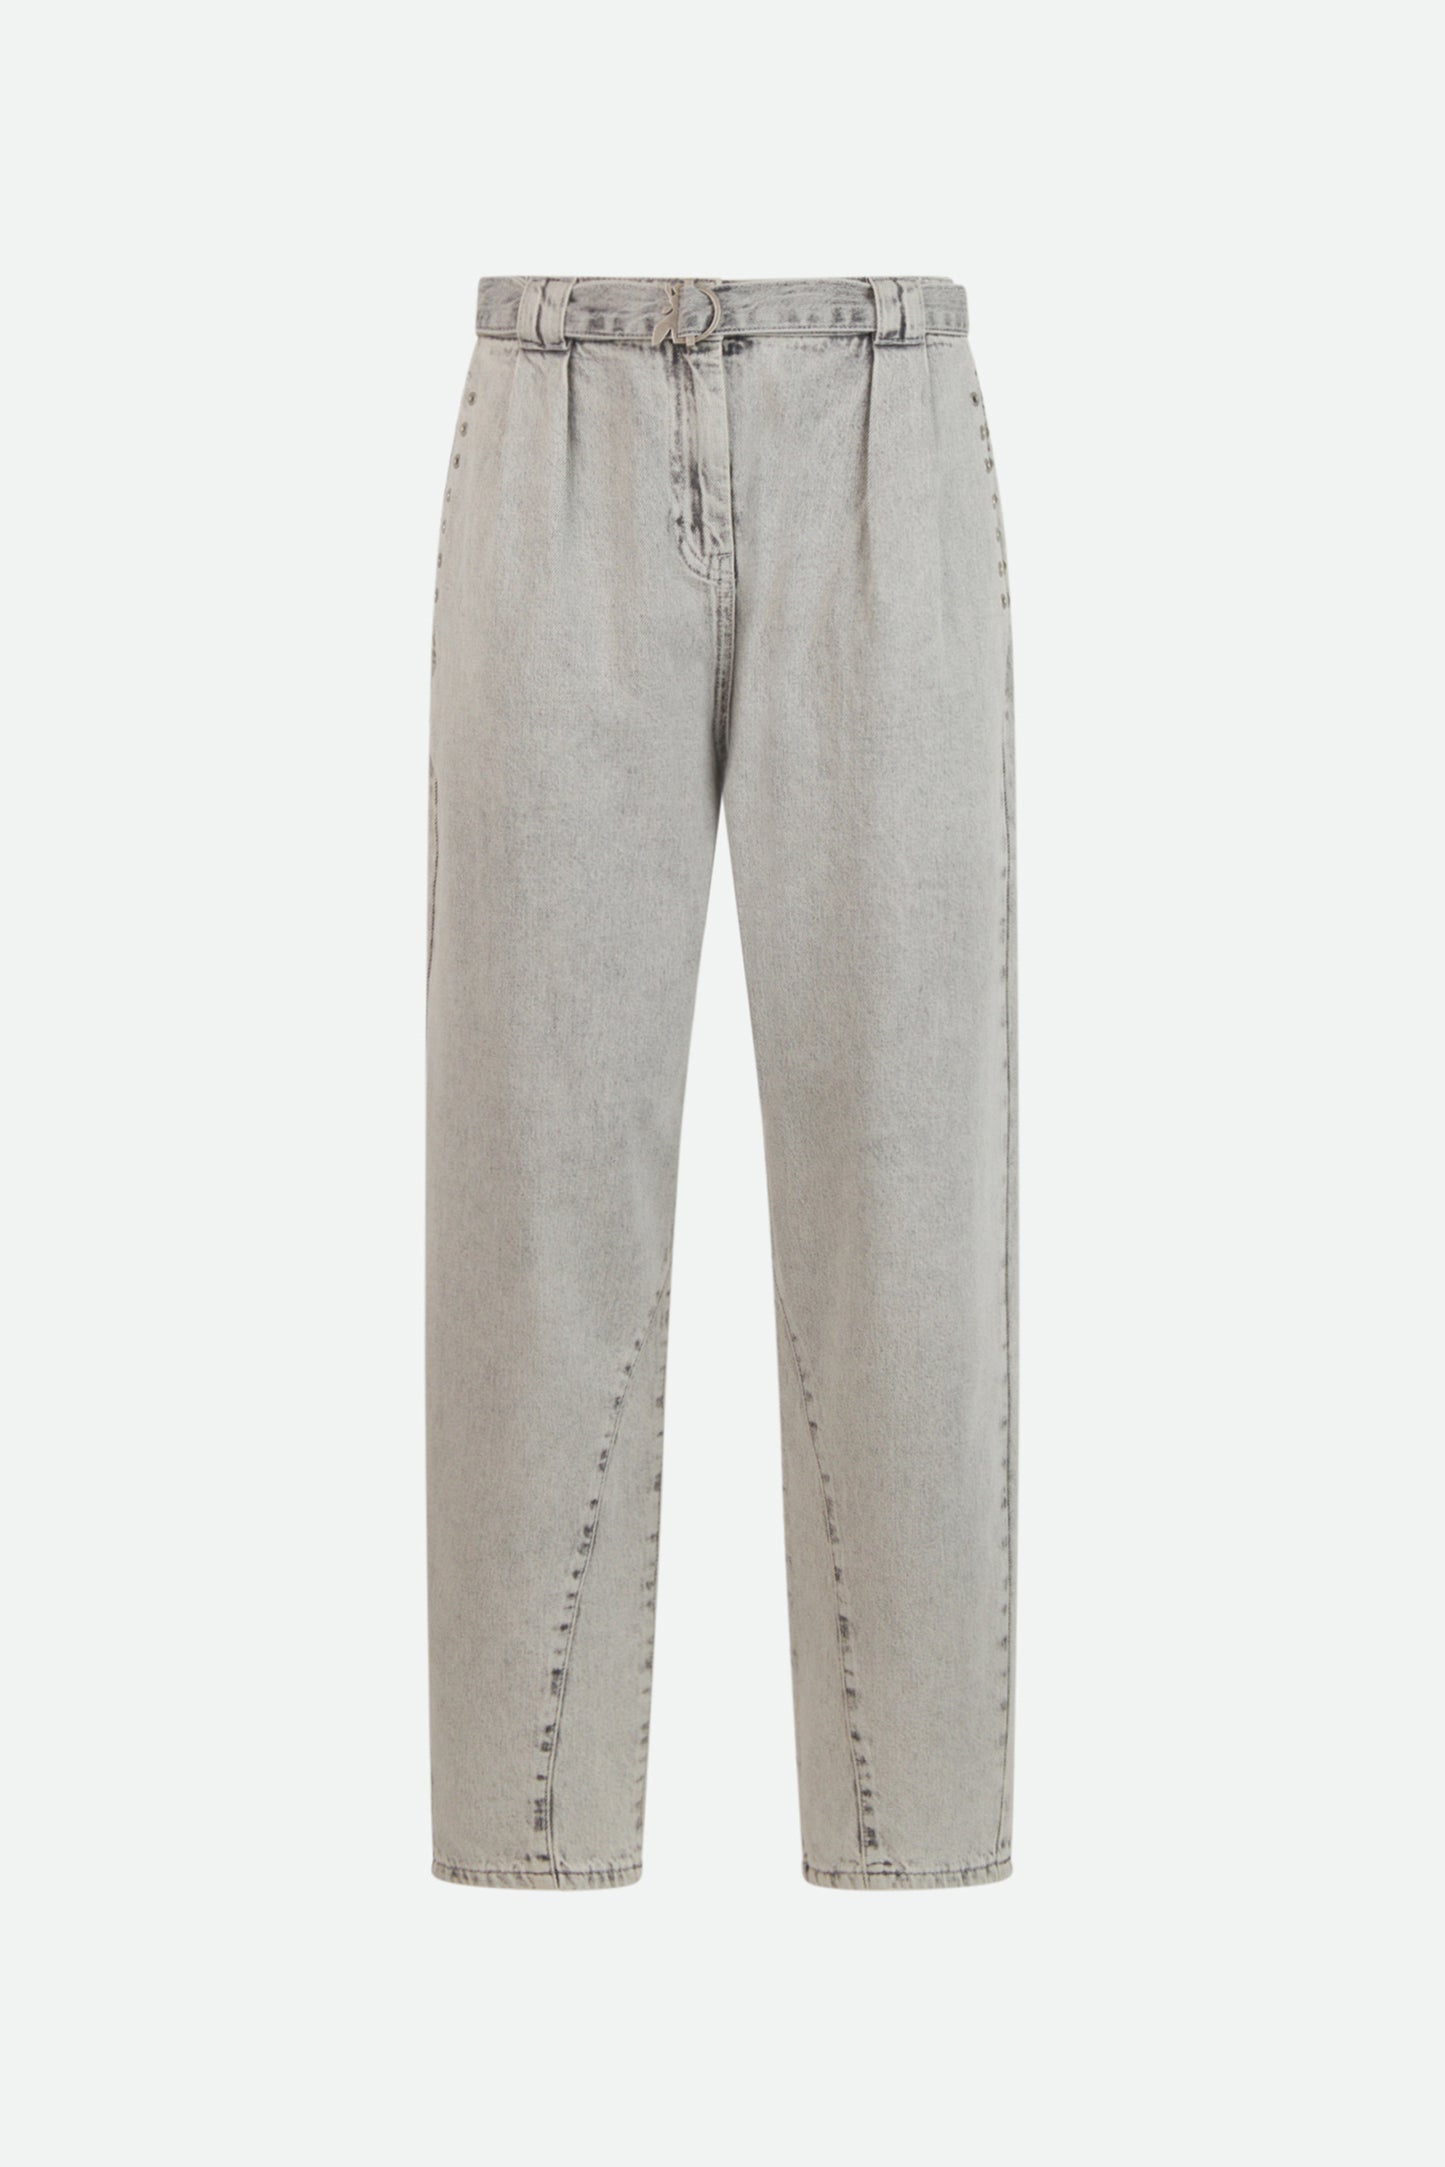 Patrizia Pepe Jeans Gray Relax Fit